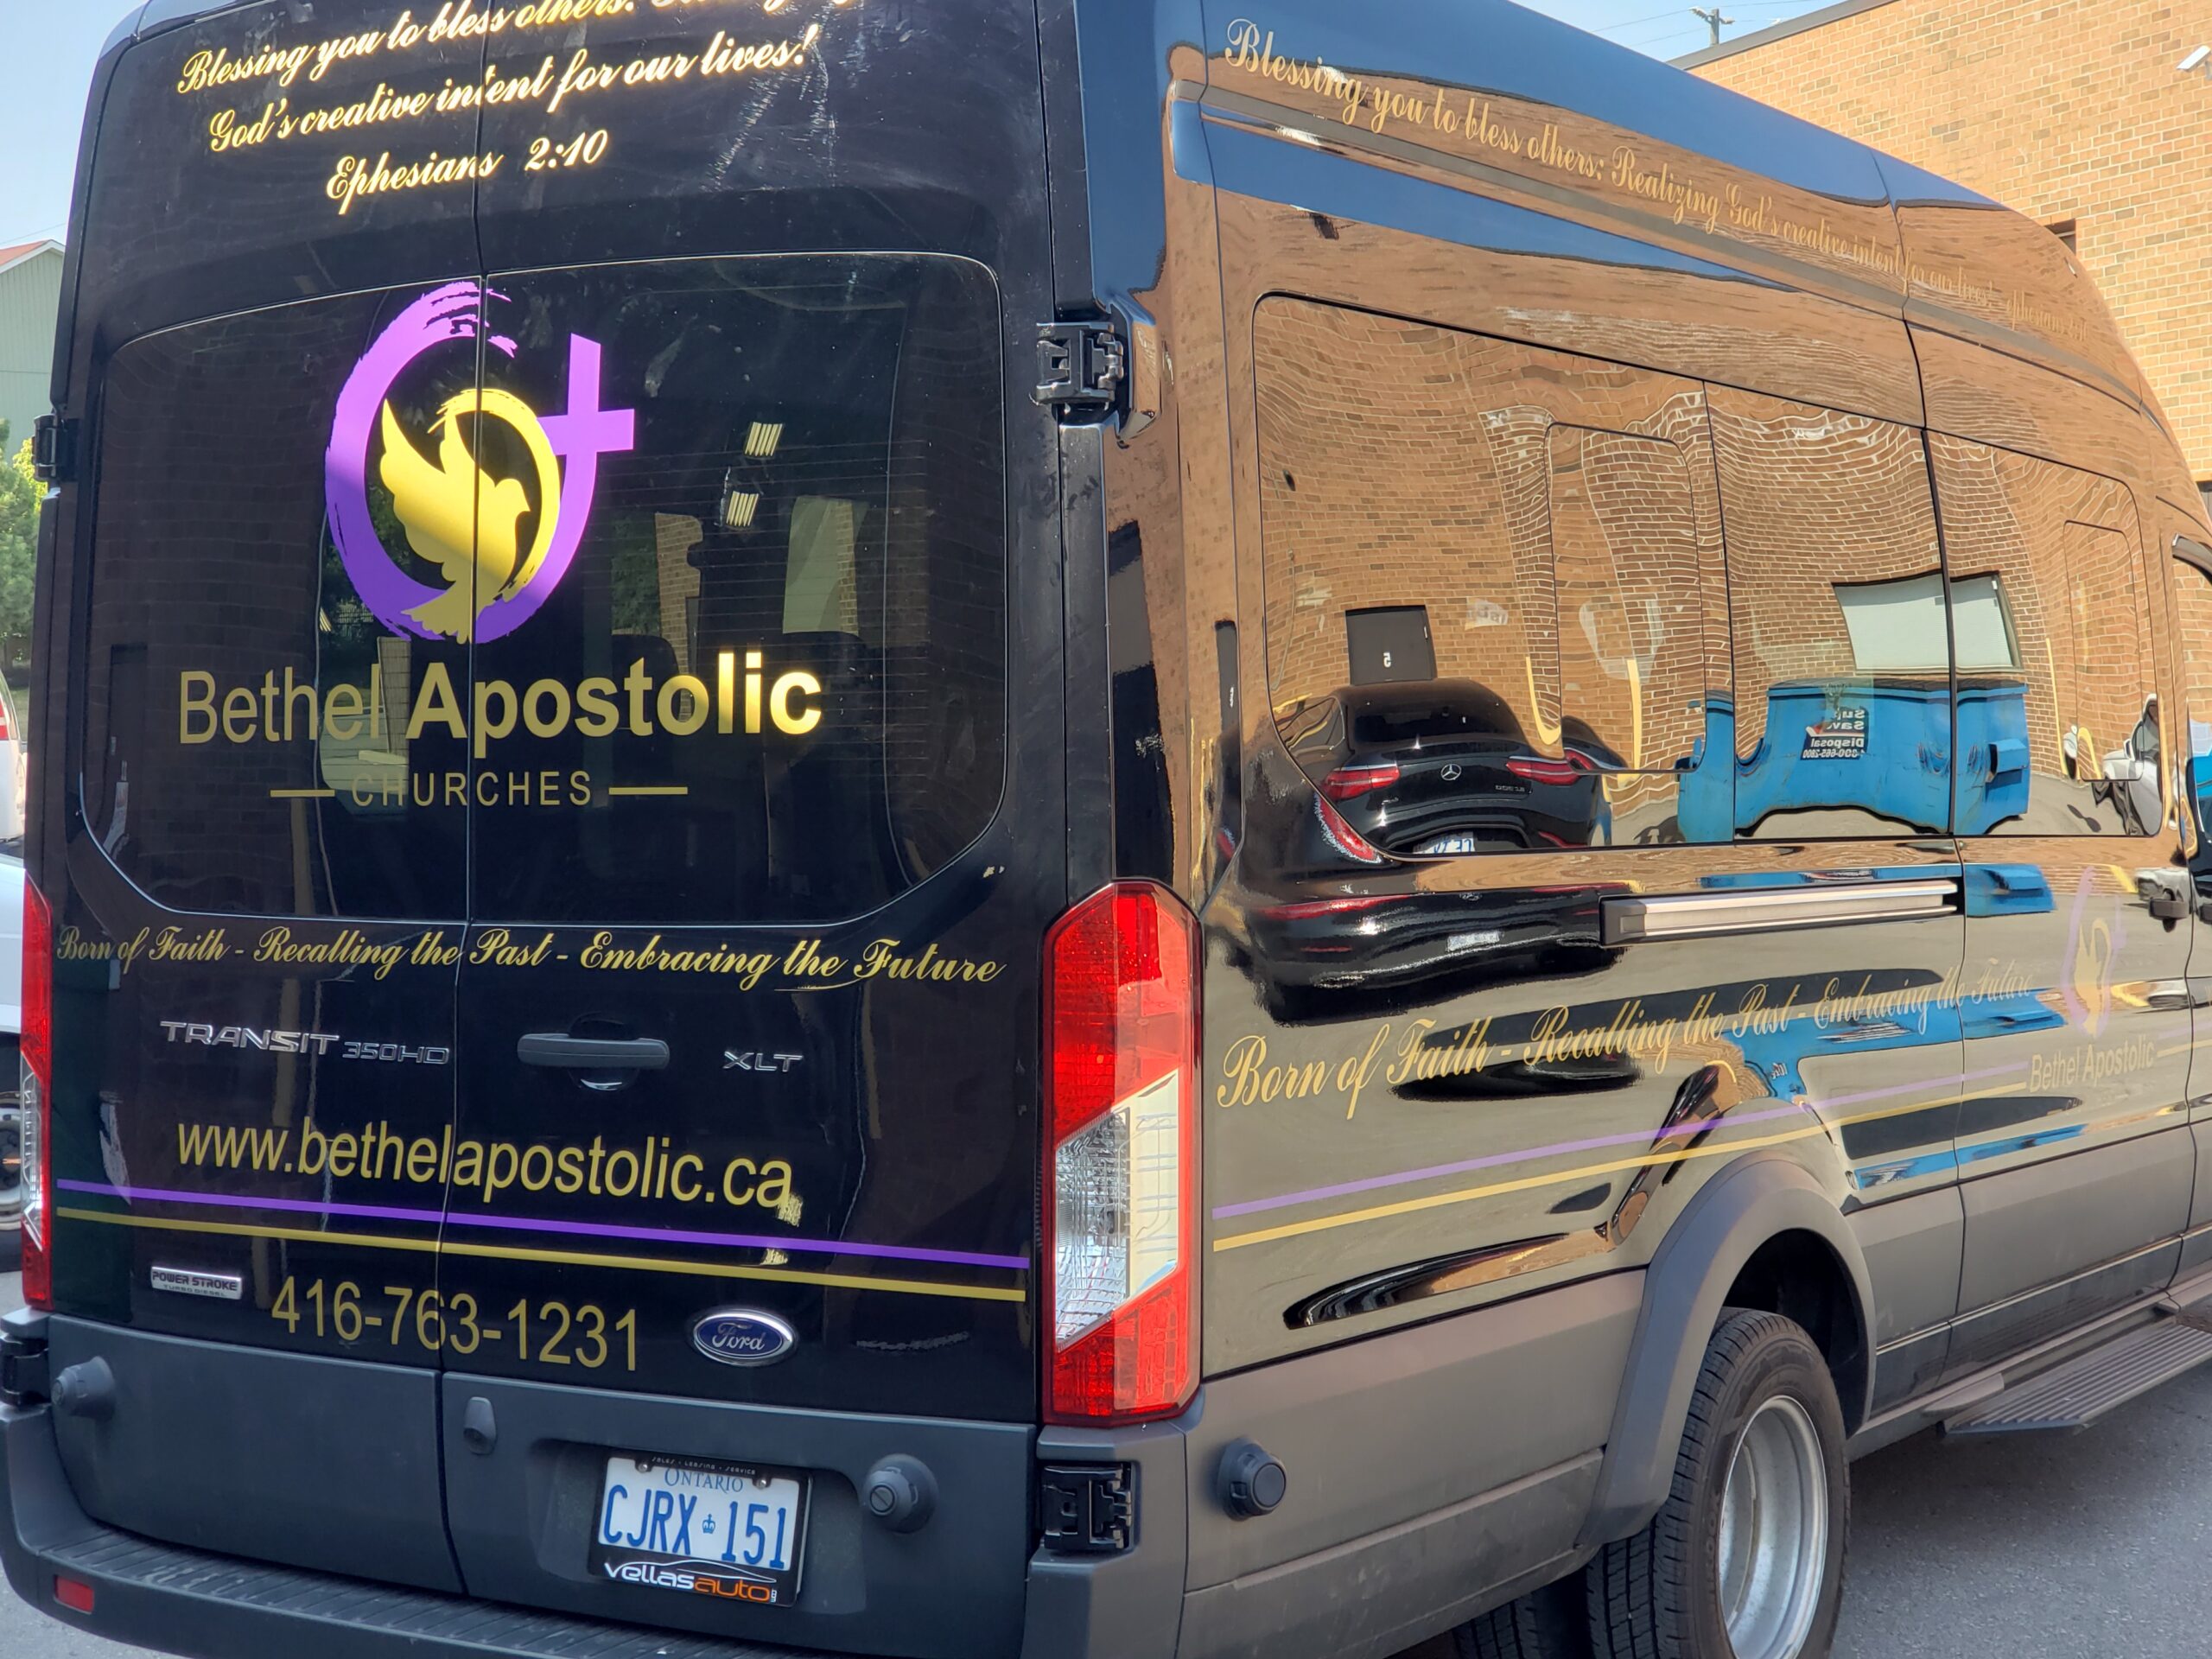 A Black Van Wrapped with Bethel Apostolic's Branded Graphics